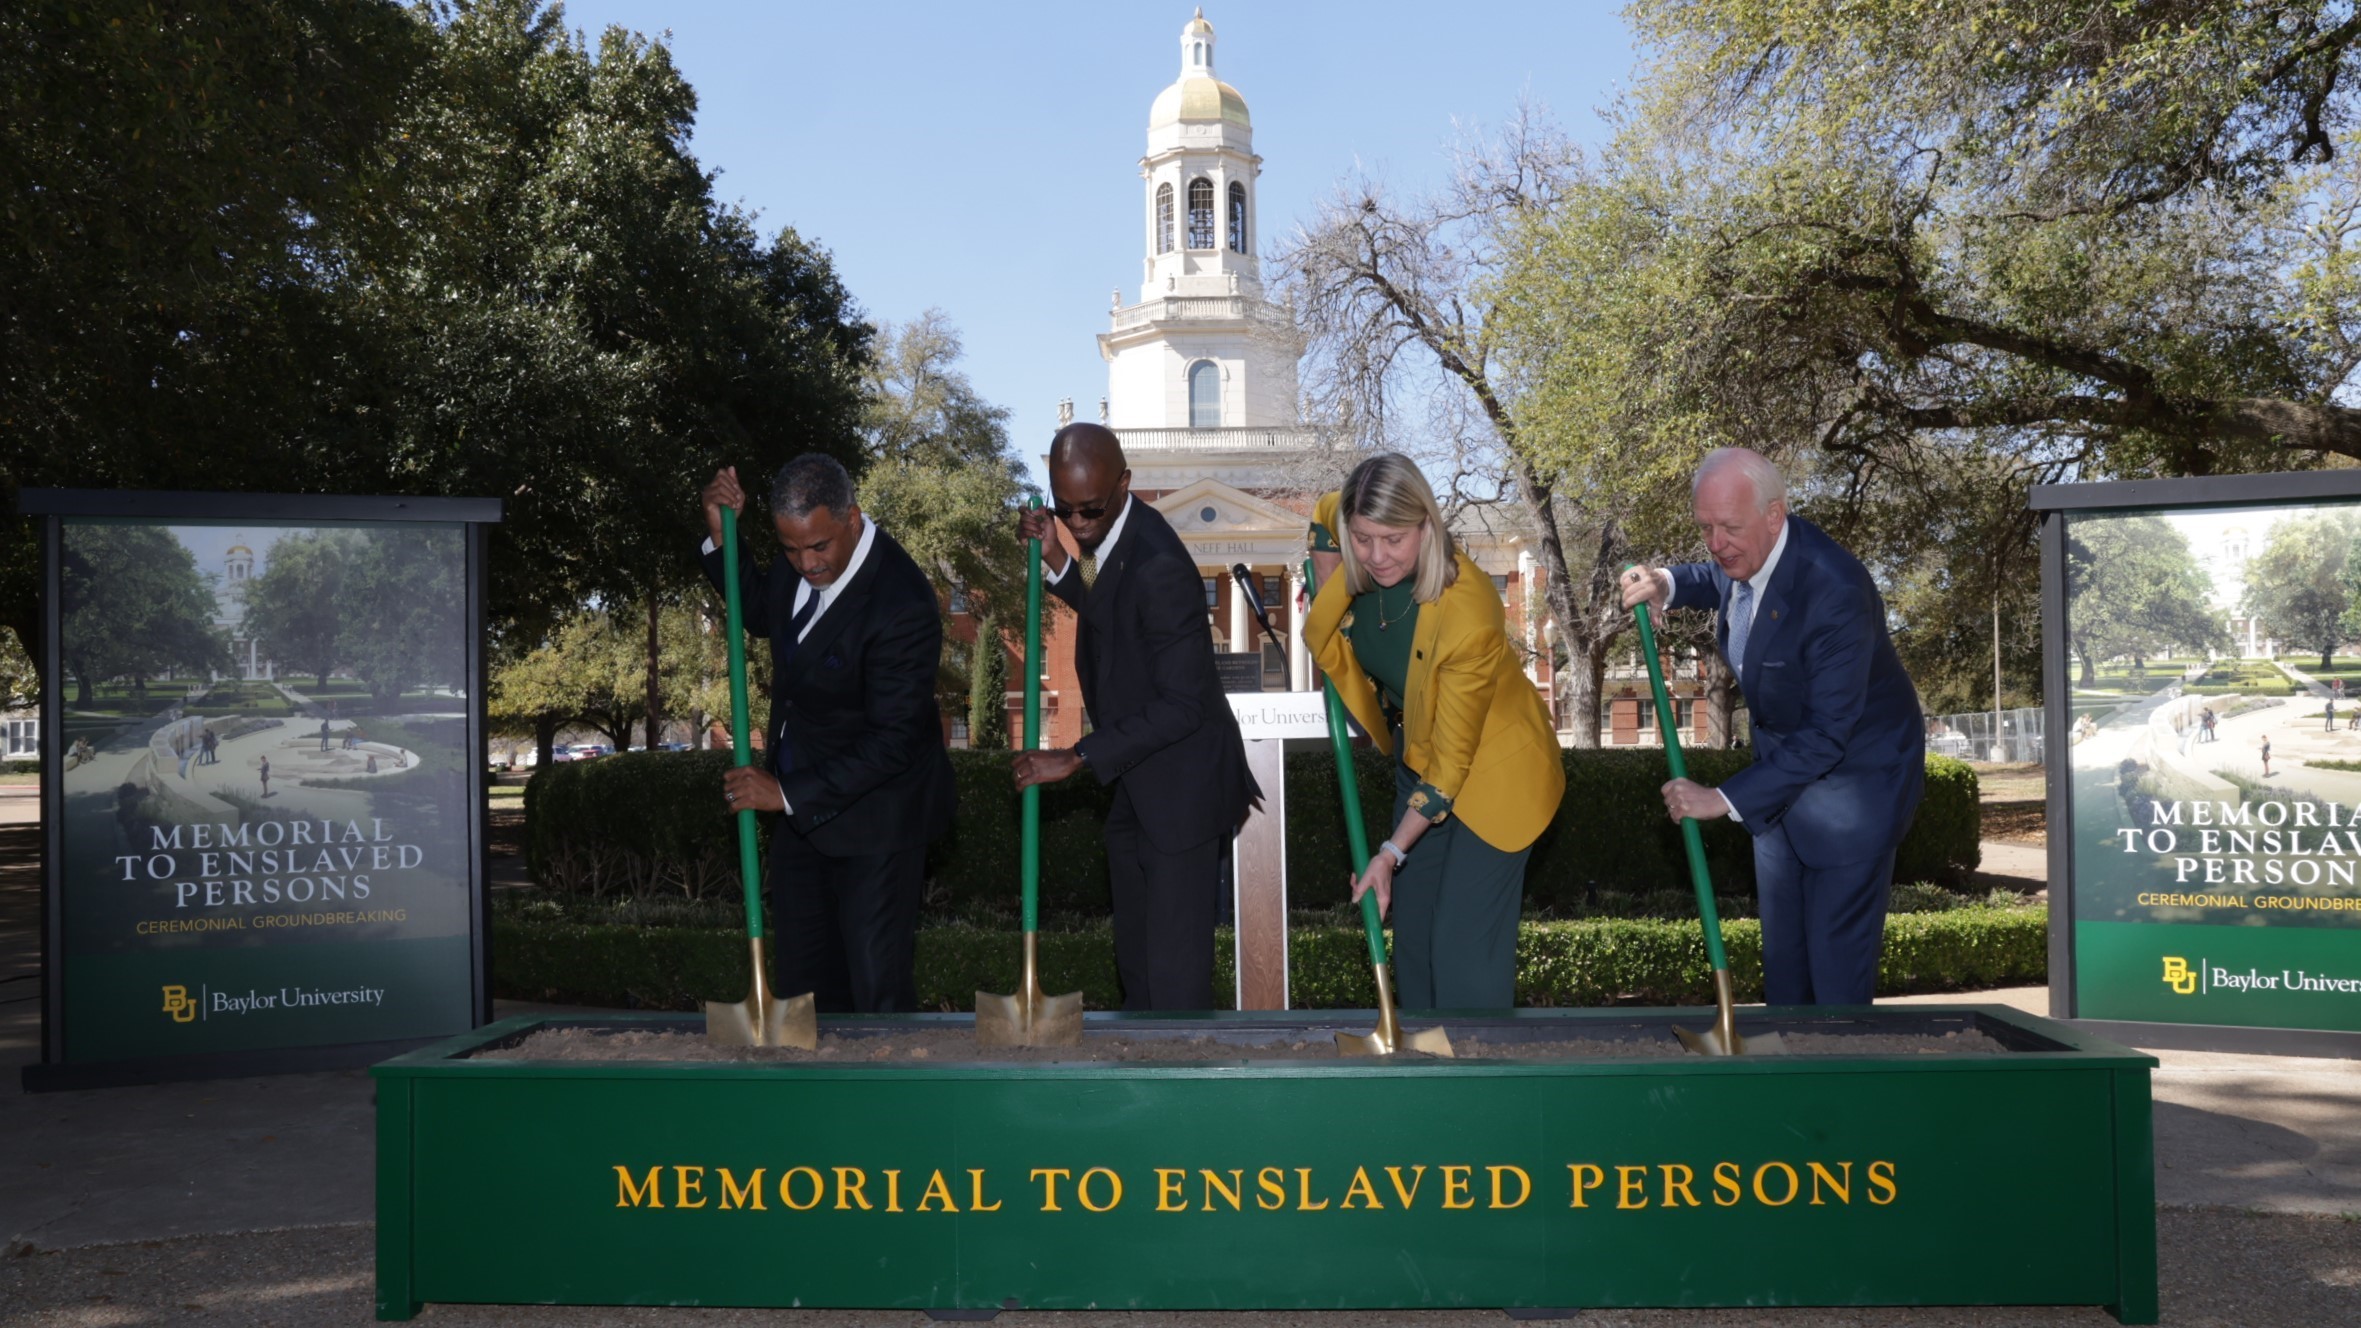 Baylor Regents, Commission Members and University Leadership perform a ceremonial "turning of the dirt" during the groundbreaking for the Memorial to Enslaved Persons.